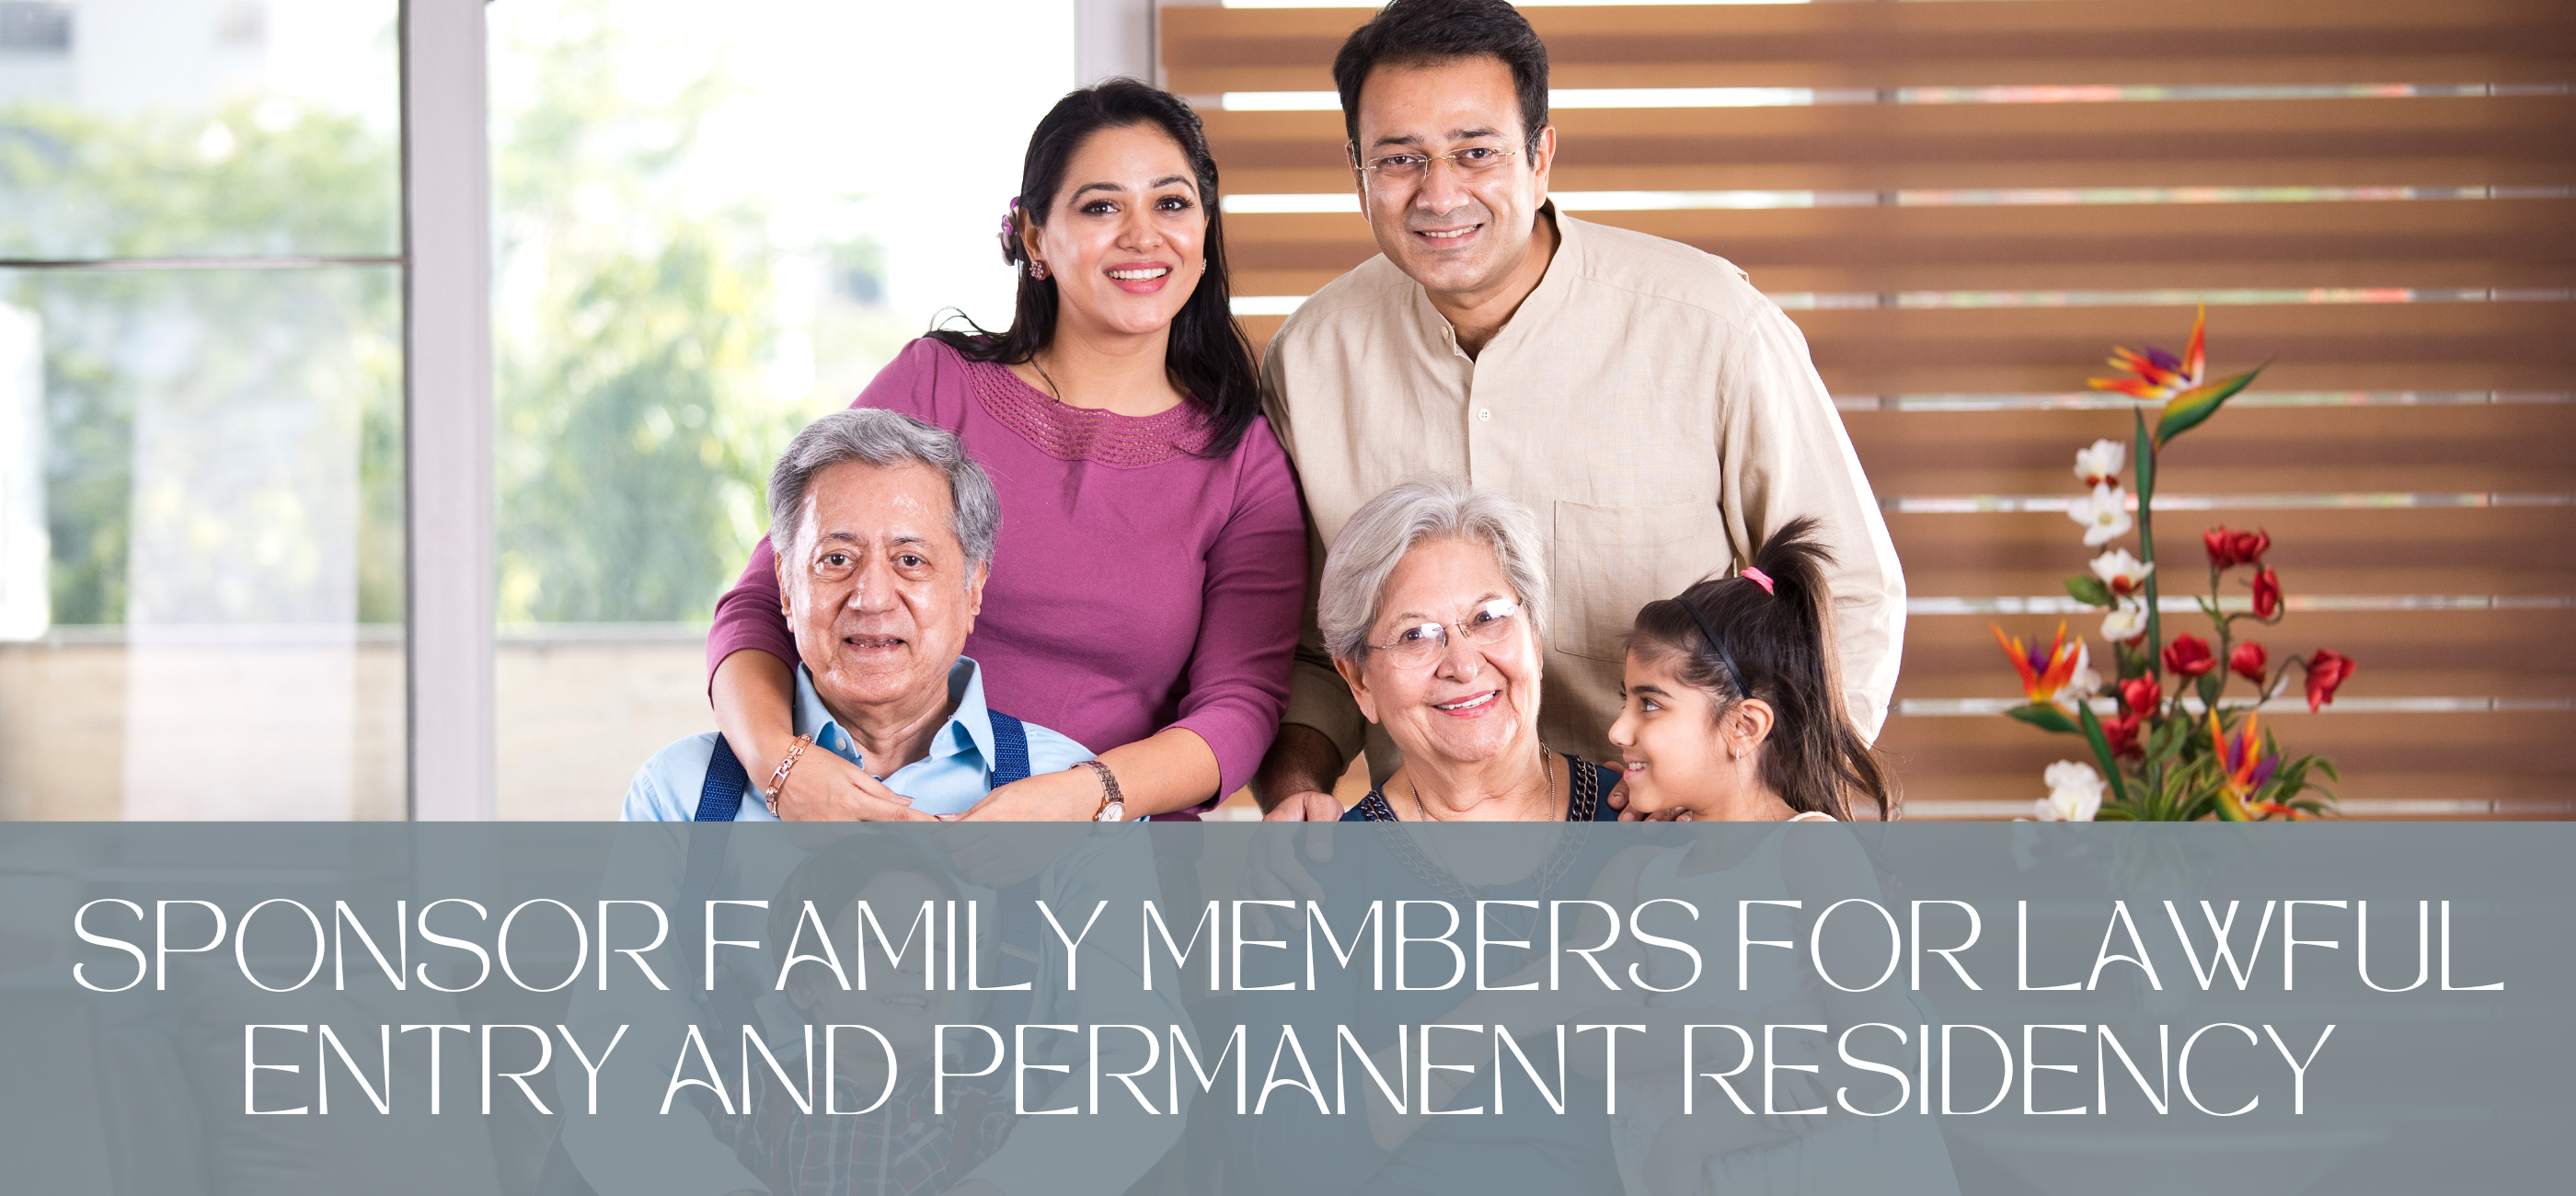  Family-Based Immigration: Bringing Your Parents to the U.S.